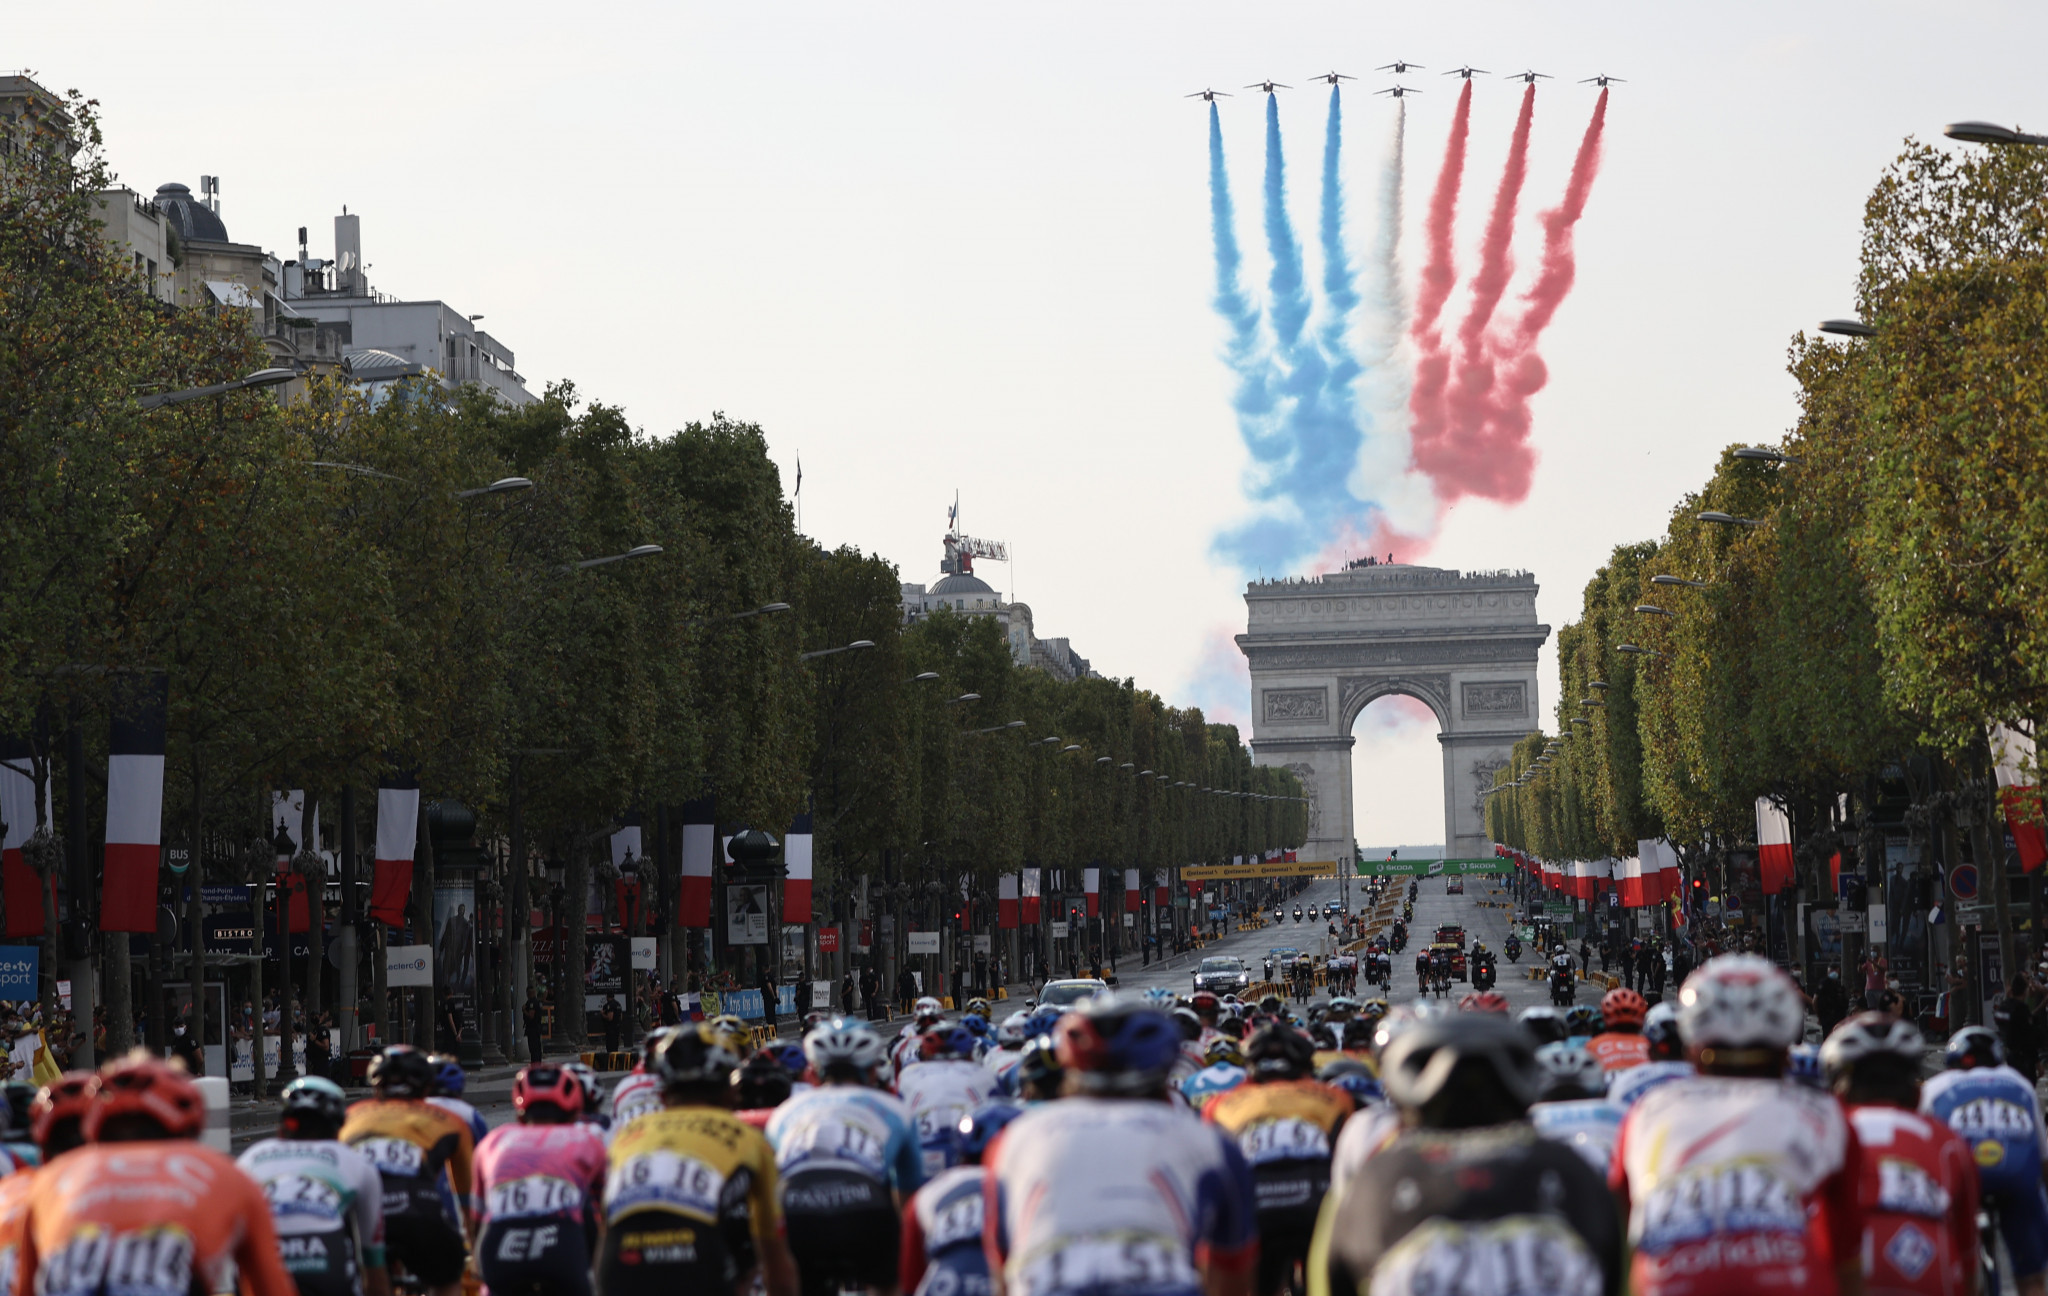 The Champs-Élysées has held the final stage of the Tour de France every year since 1975 ©Getty Images